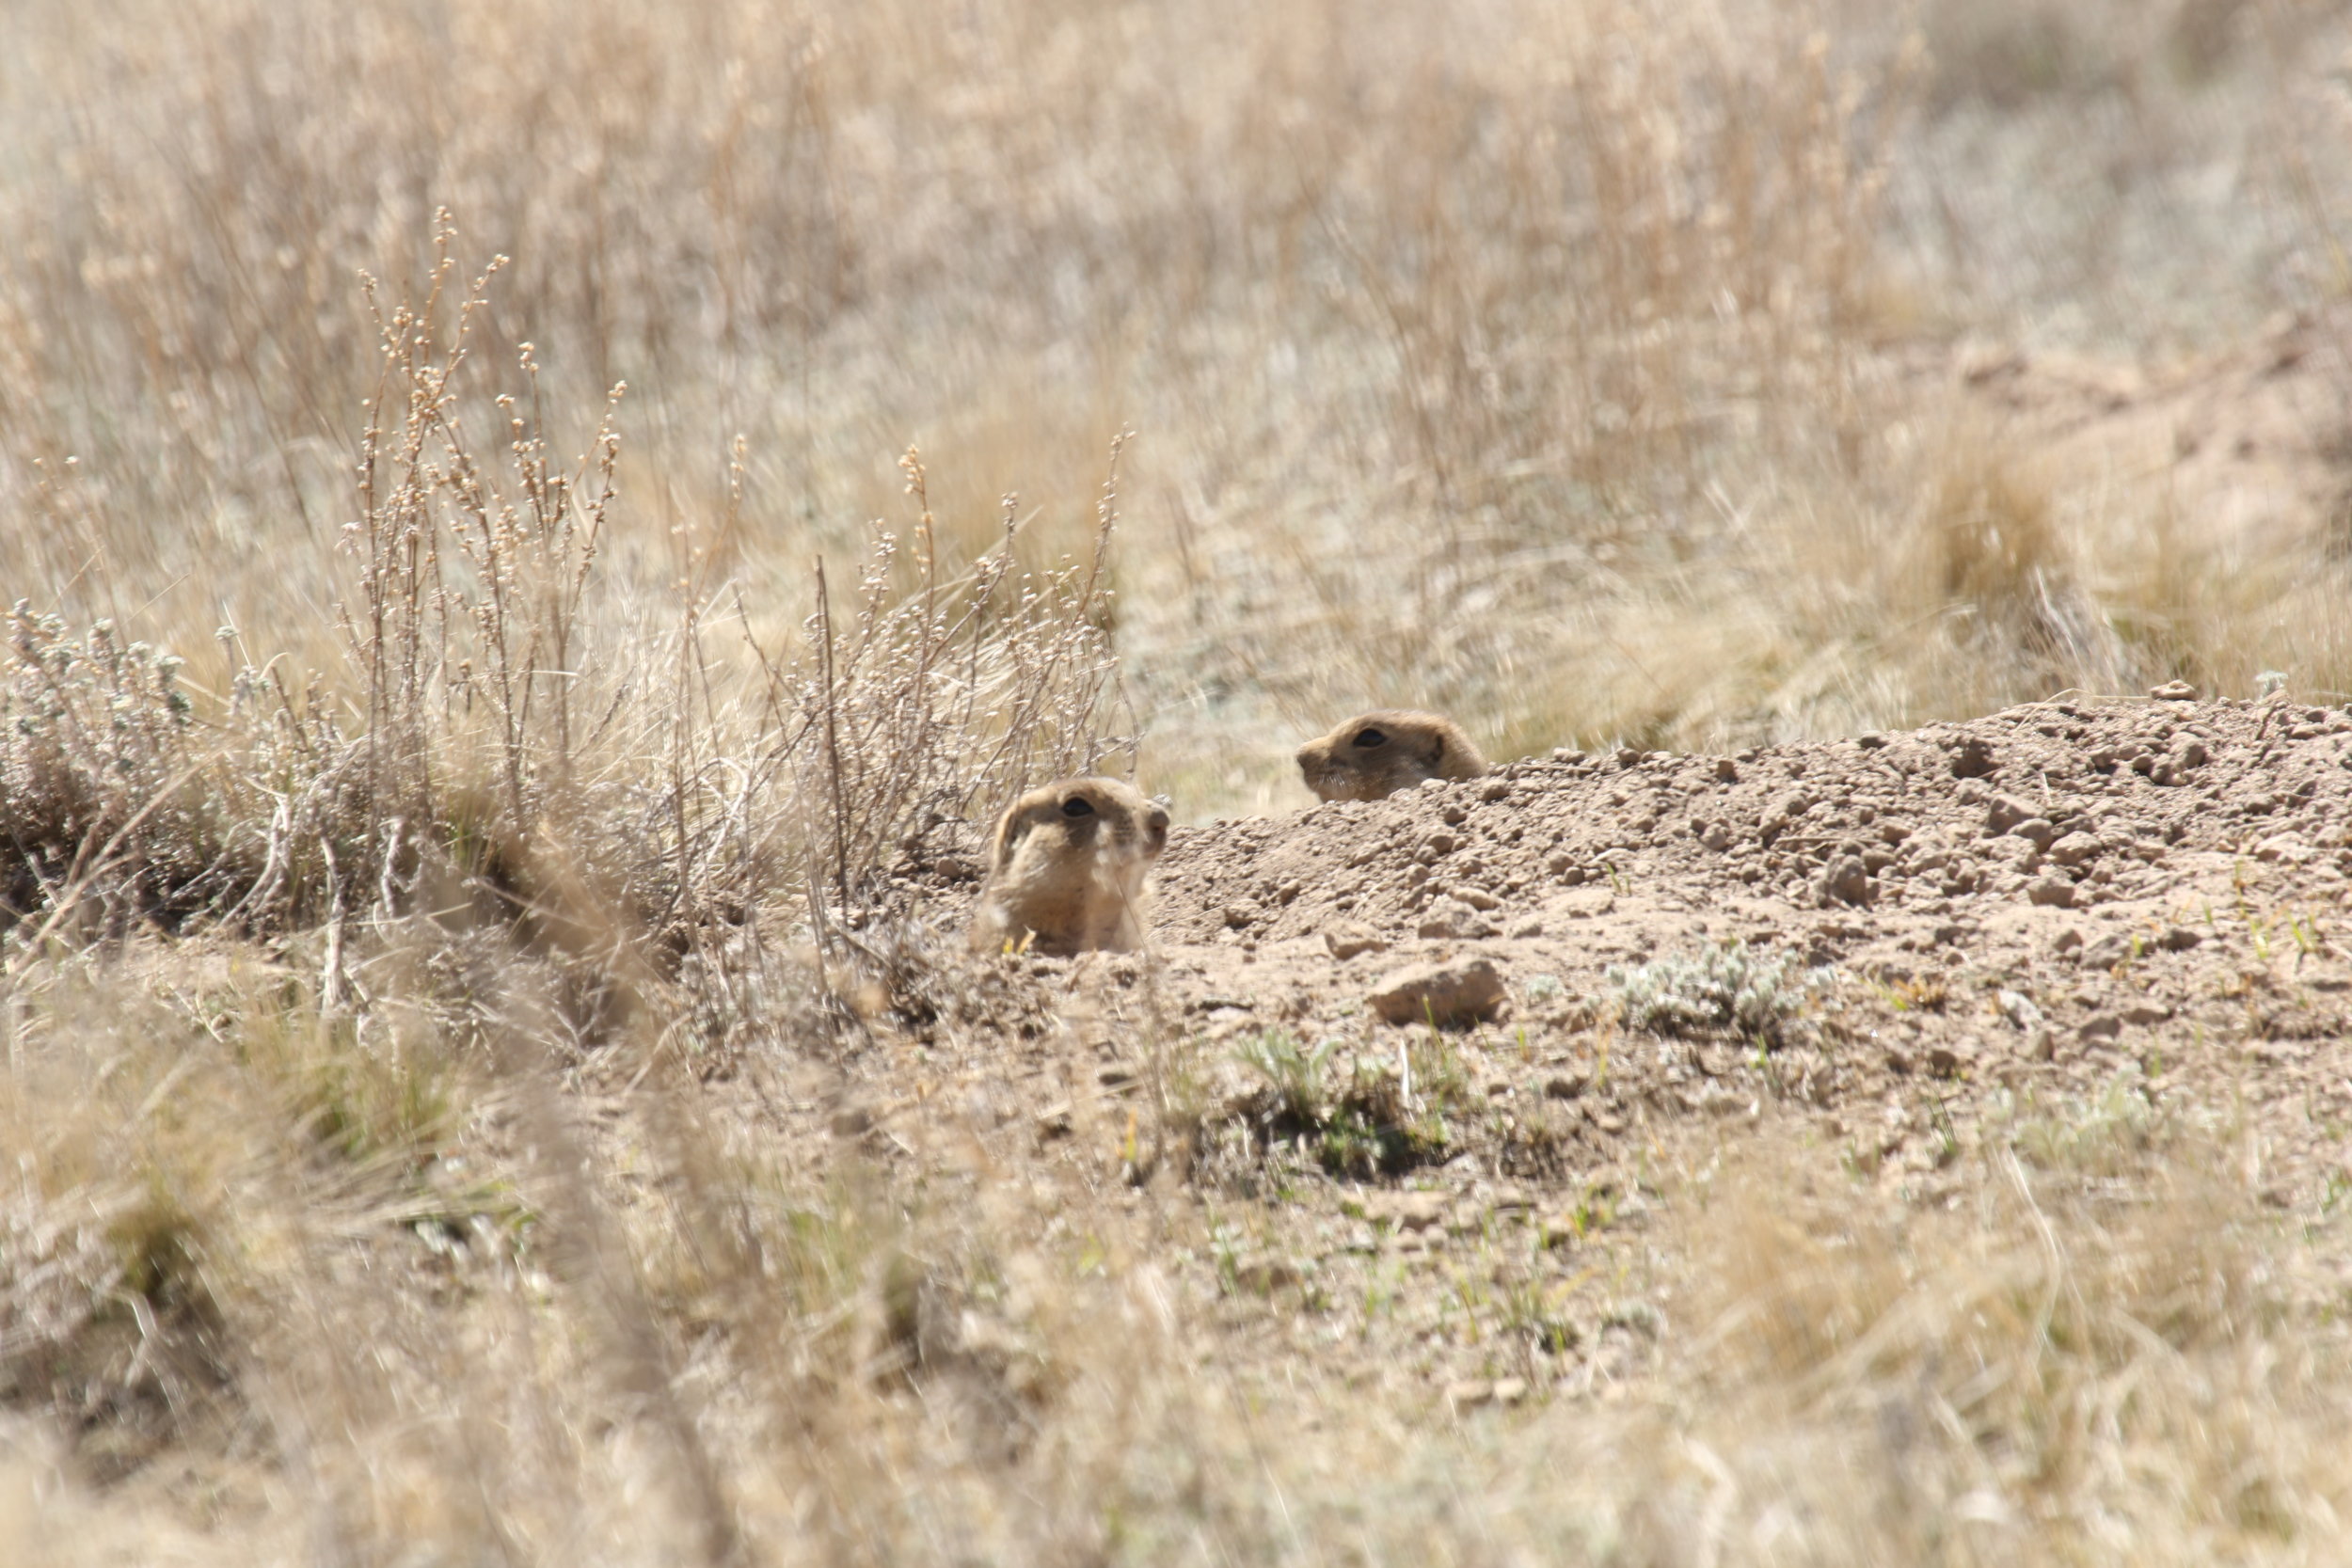  Upon perceiving a threat, a prairie dog will often run to the mouth of its burrow, keeping an eye on its surroundings from the safest position.  ©MRR 2017  